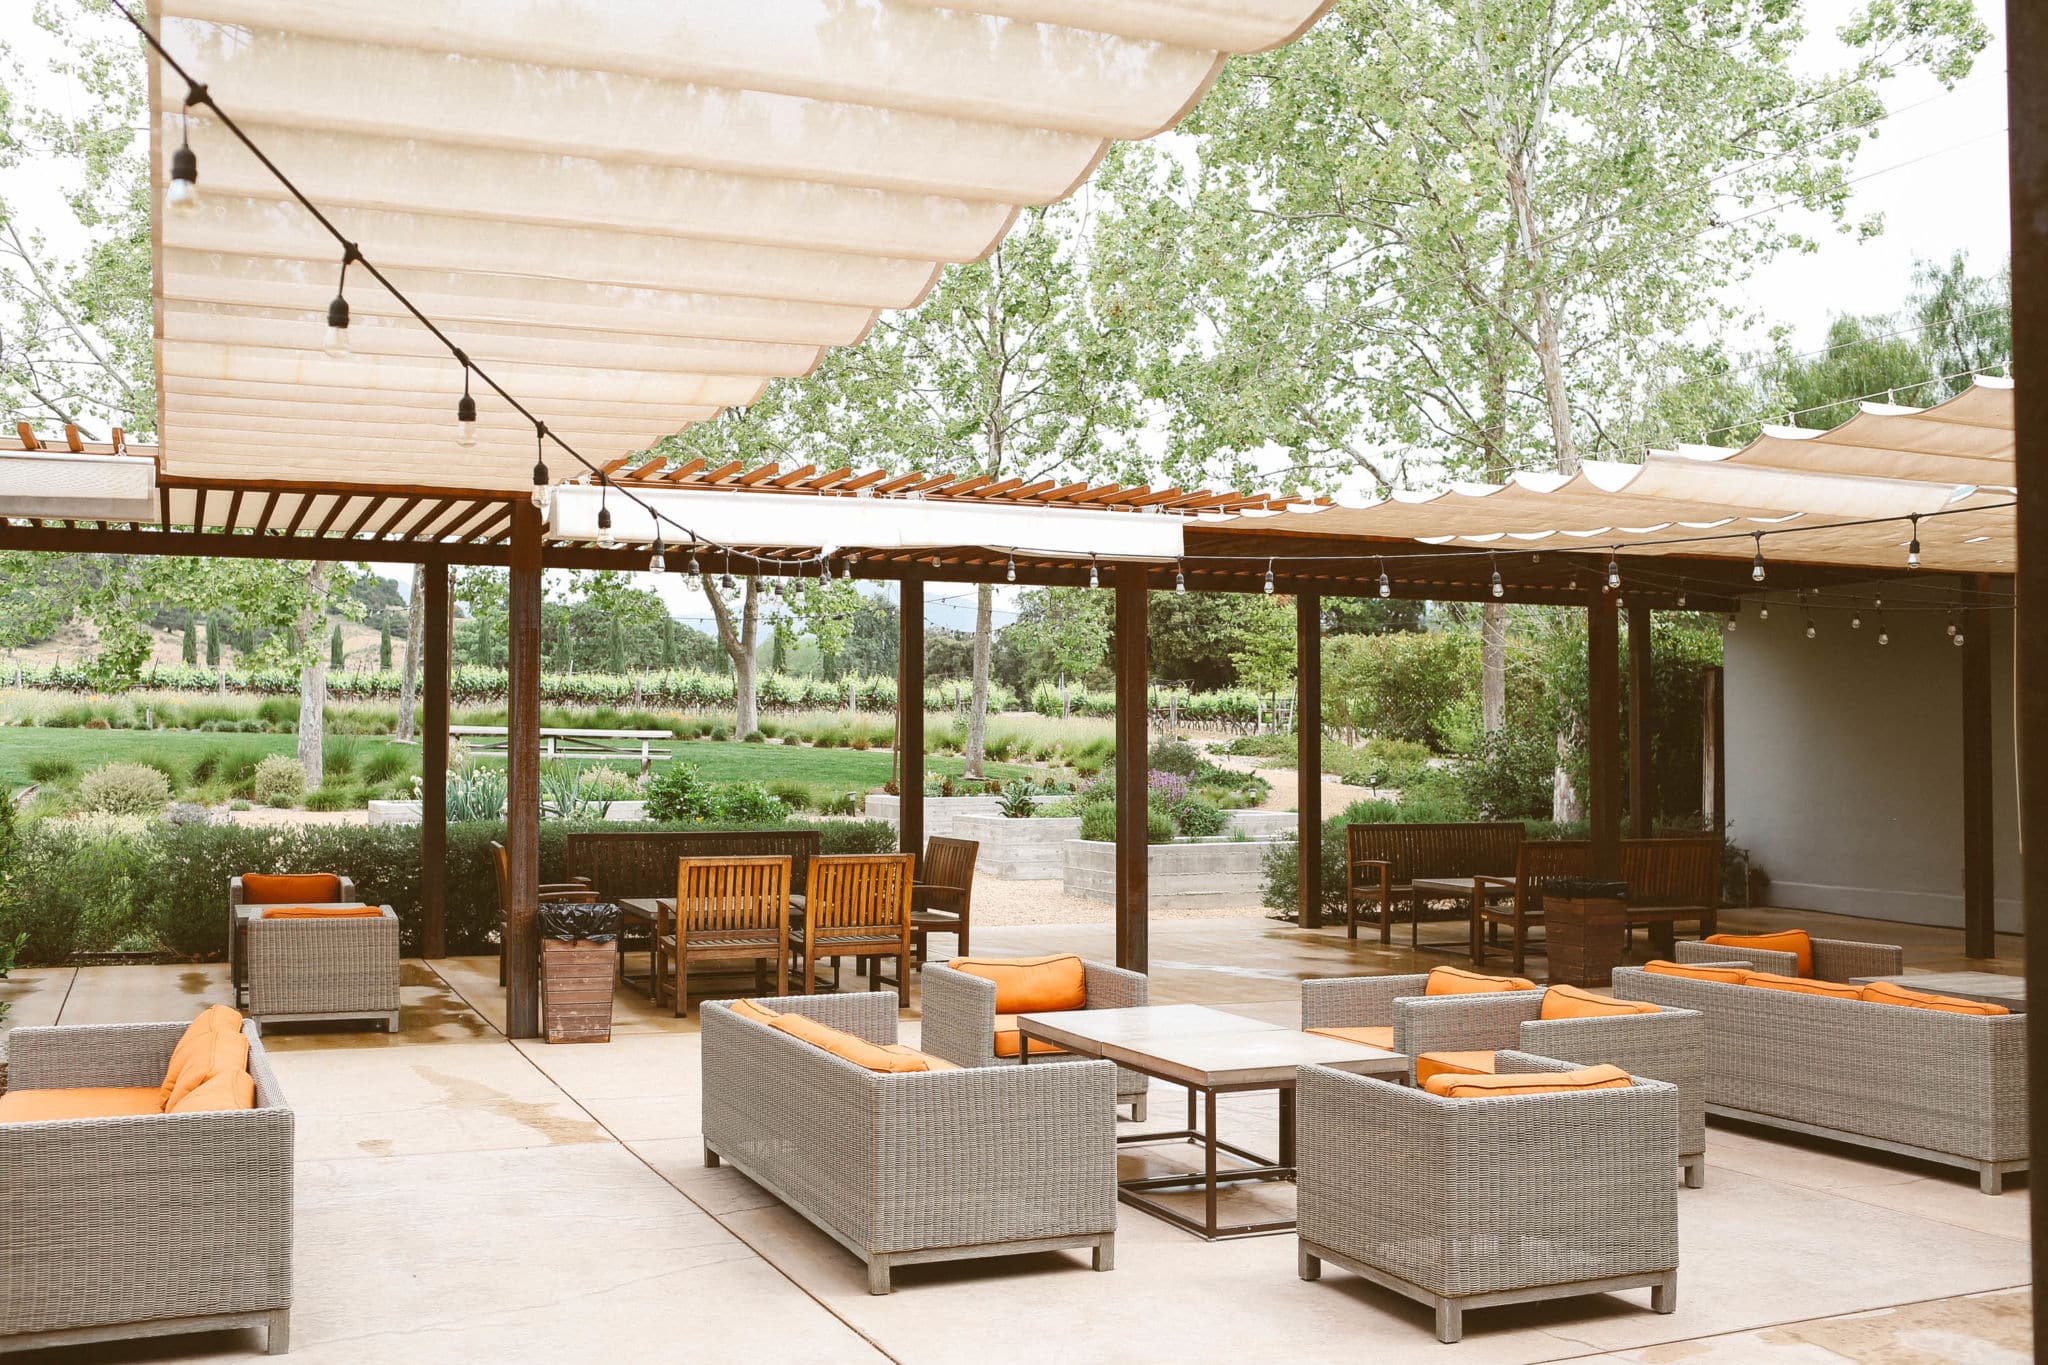 Outdoor seating area at Fess Parker winery